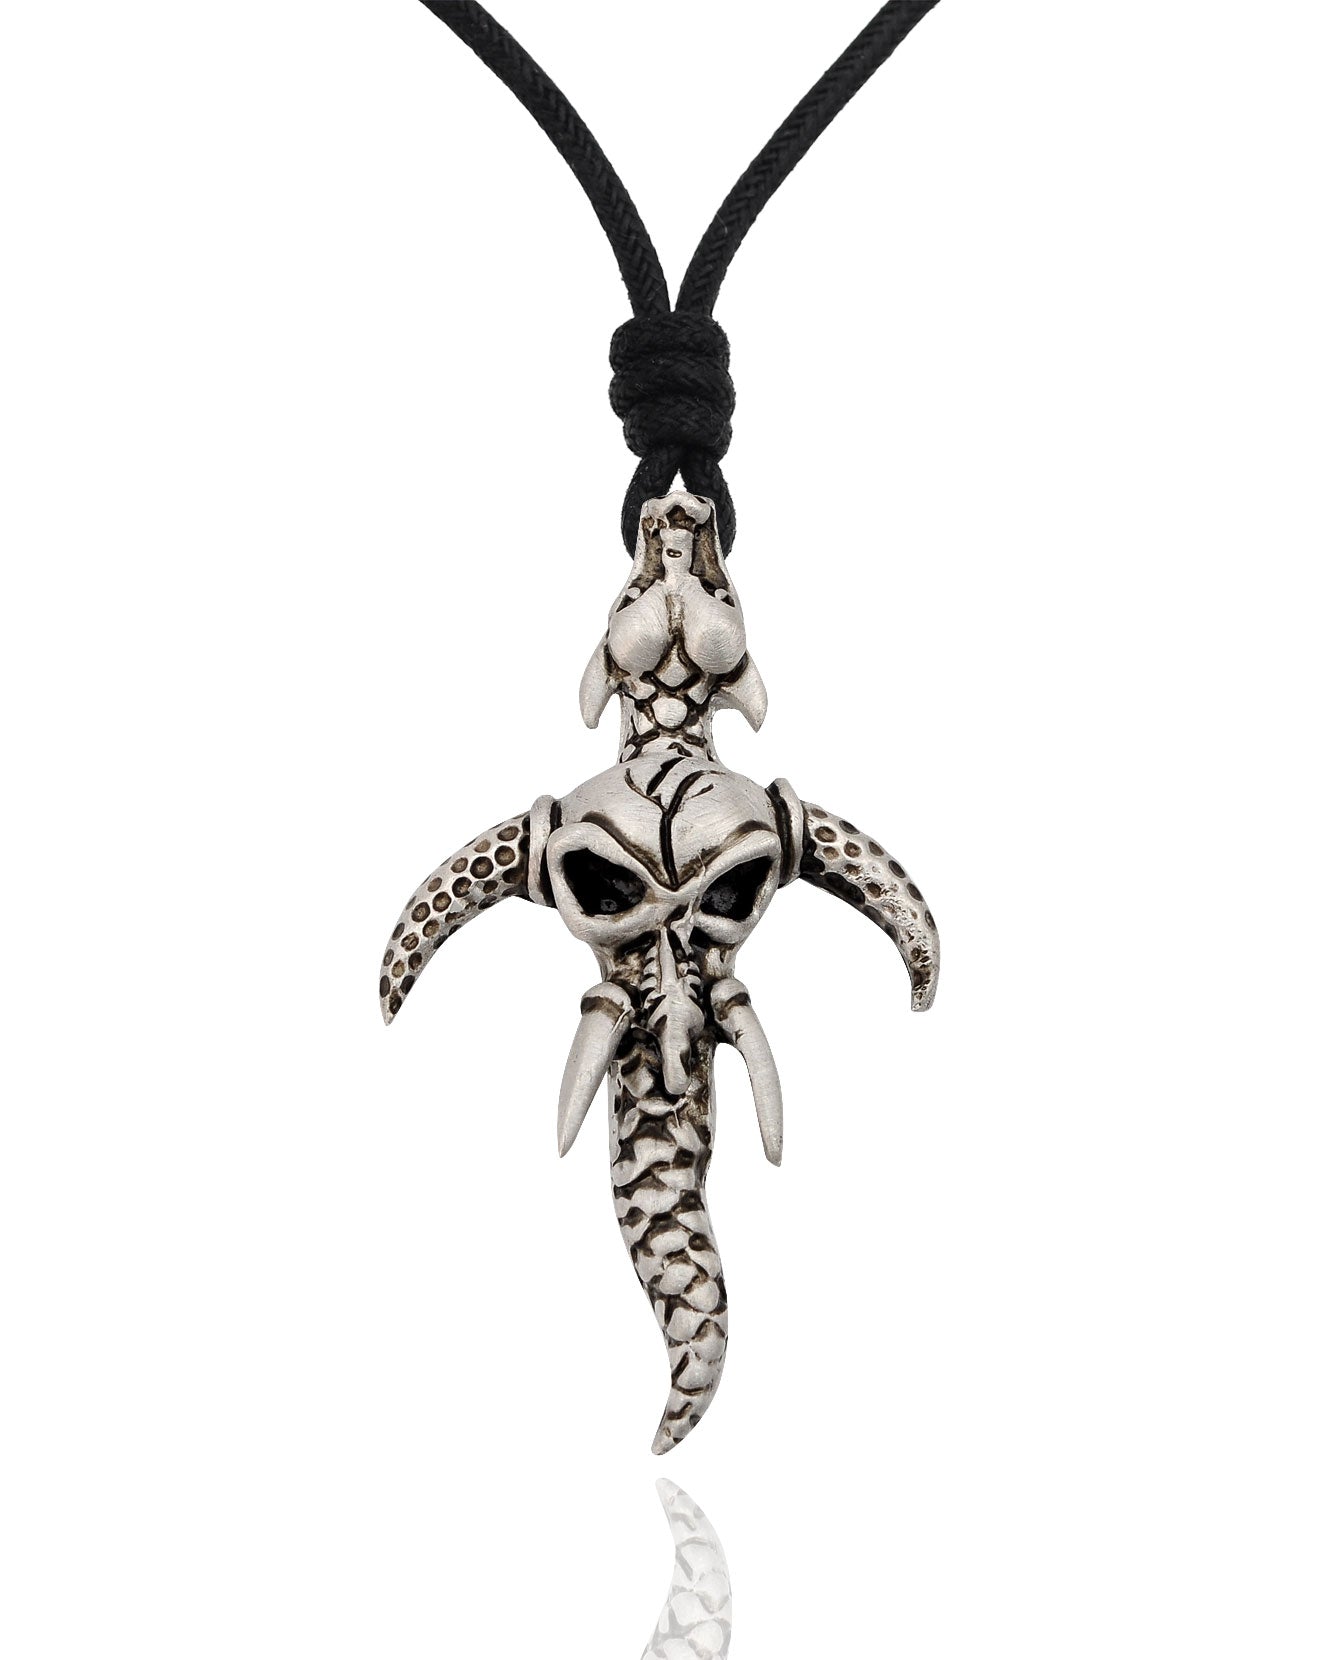 Dragon and Skull Silver Pewter Charm Necklace Pendant Jewelry